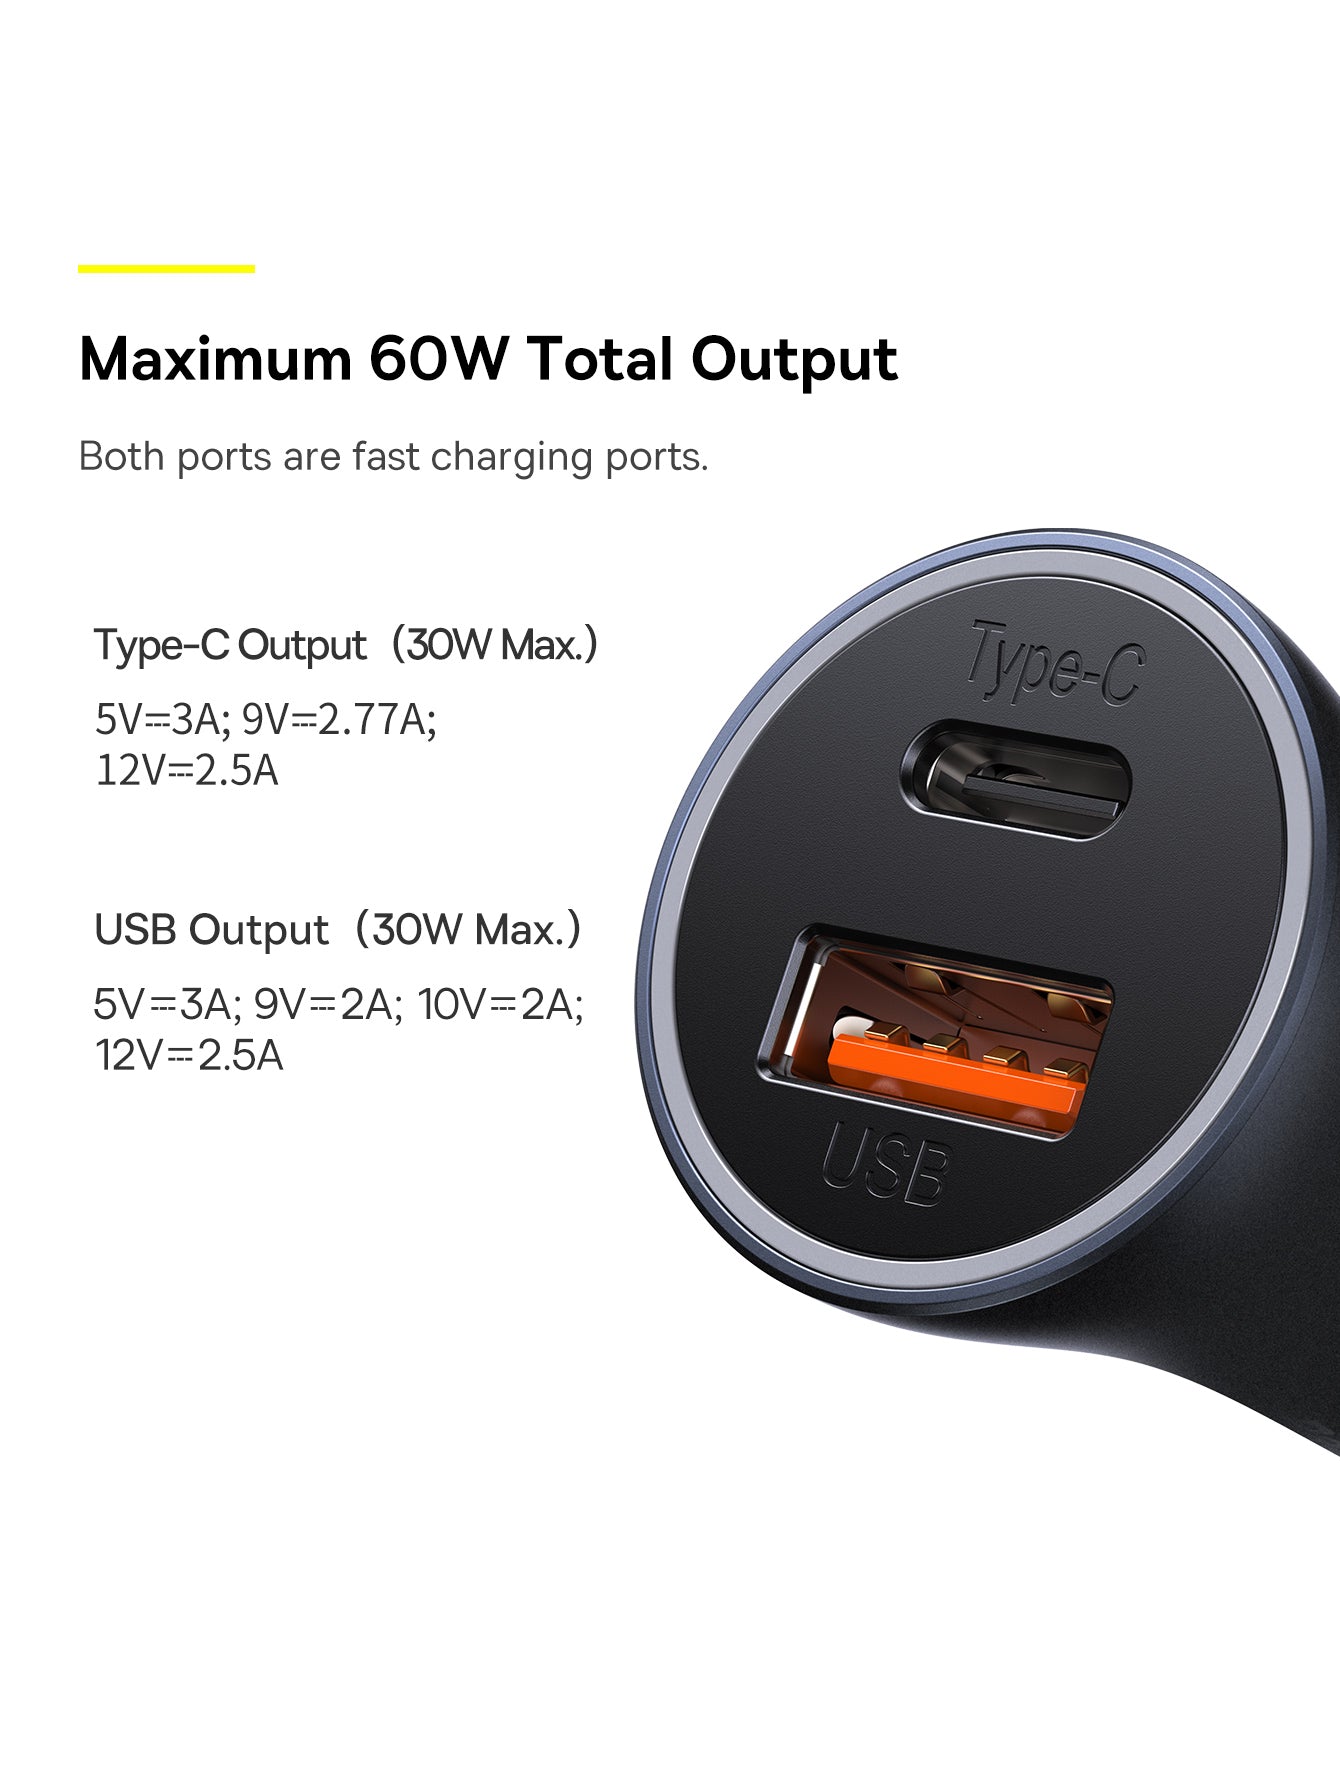 Baseus Golden Contactor Max Fast Car Charger USB + USB Type C 60 W Quick Charge Dark Grey (CGJM000113)